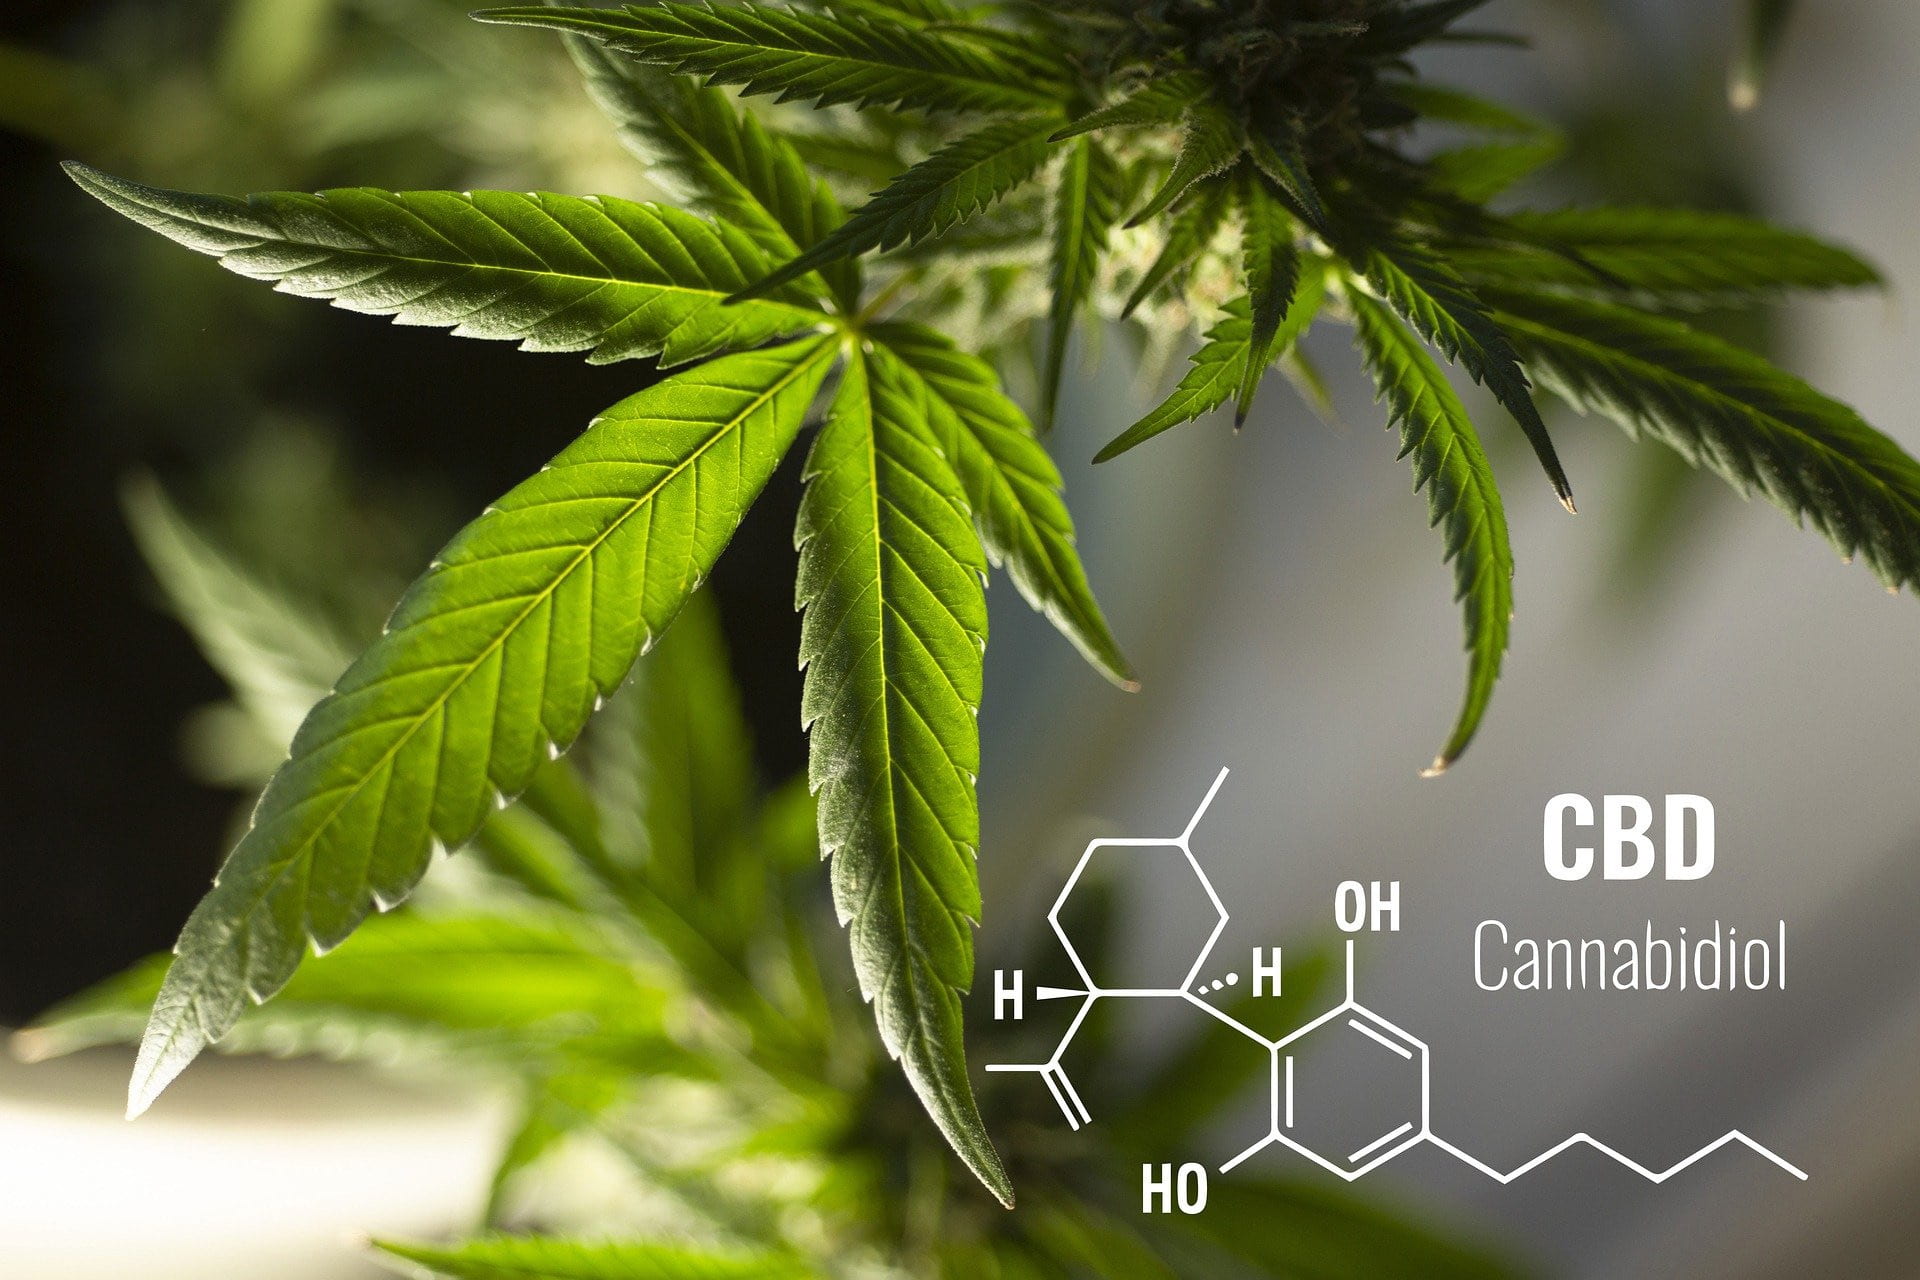 An image showcasing the leaves of the Cannabis plant and also the chemical structure of one of its compounds CBD.